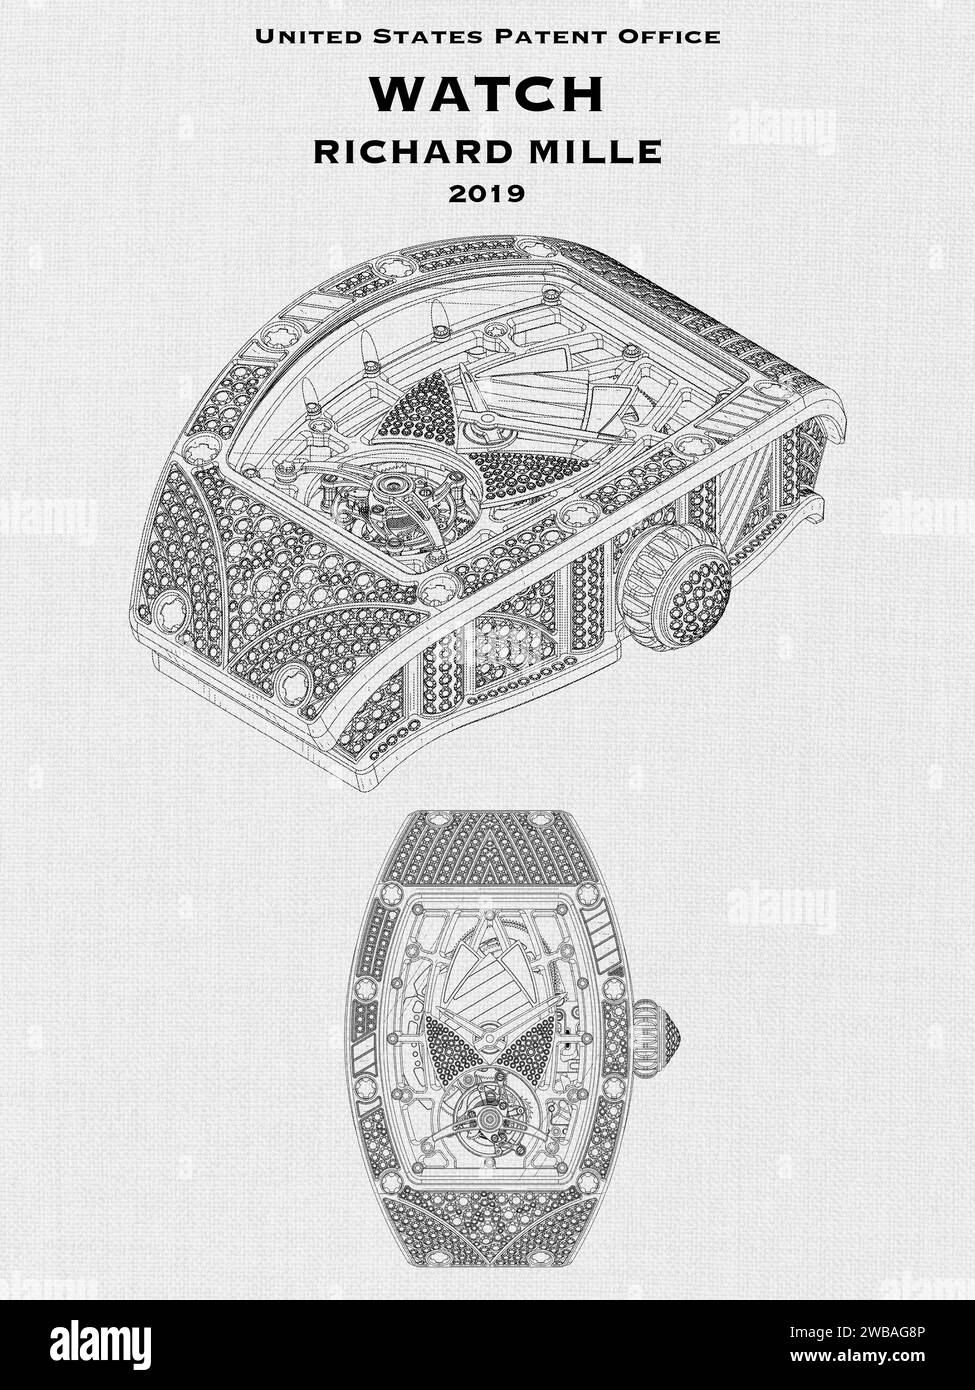 US patent office design for a luxury watch by Richard Mille on a white background Stock Photo